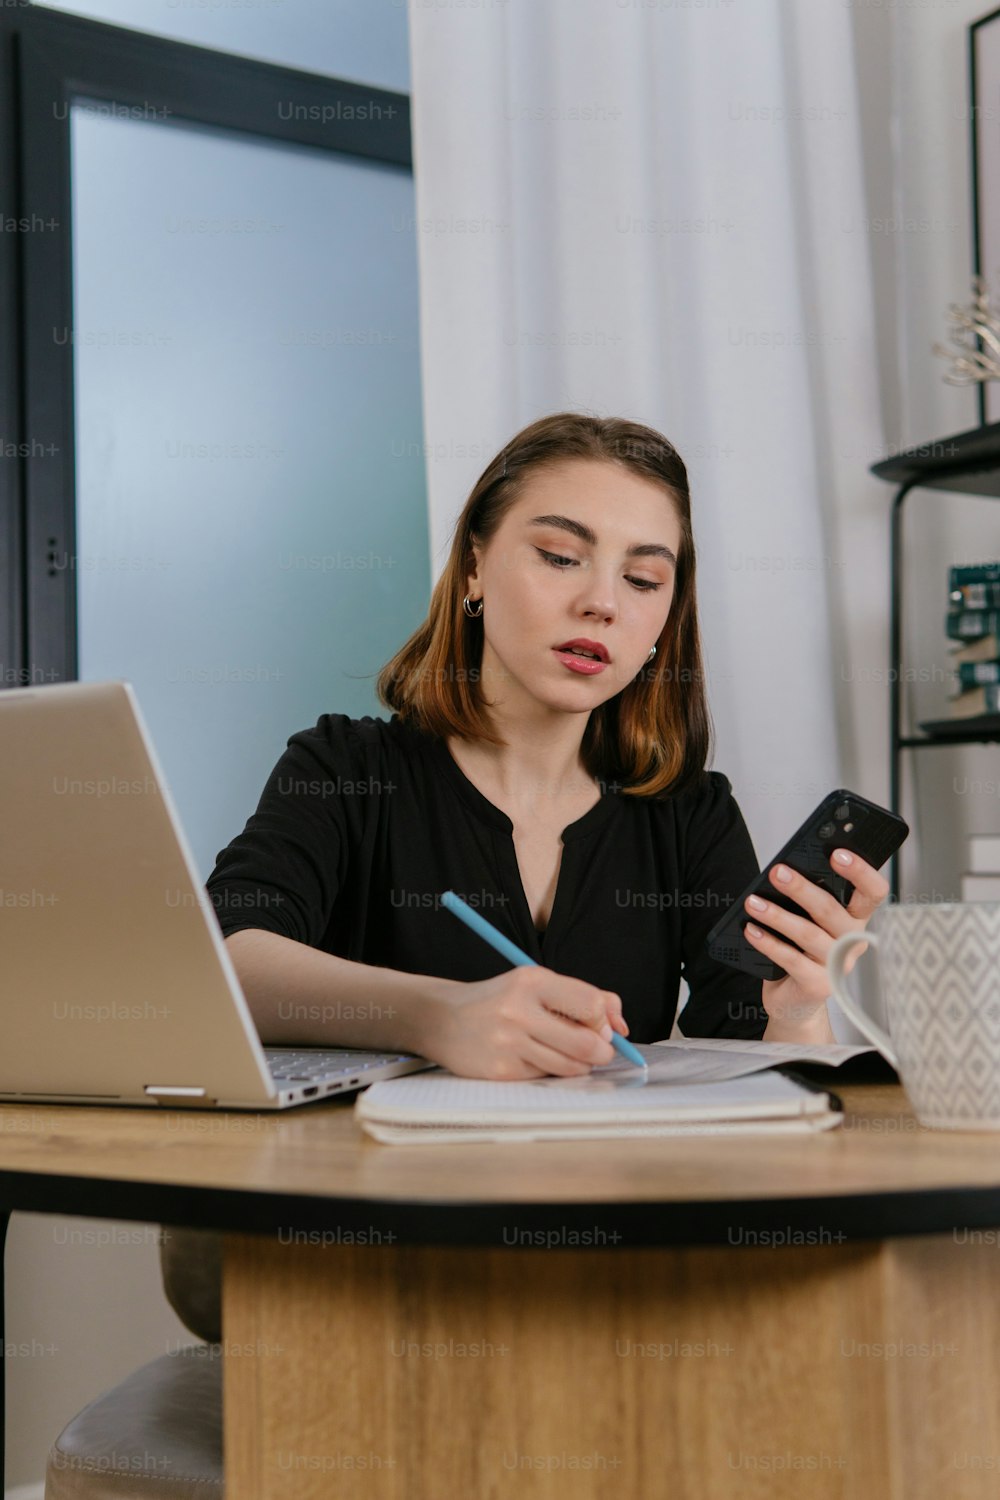 a woman sitting at a desk using a cell phone